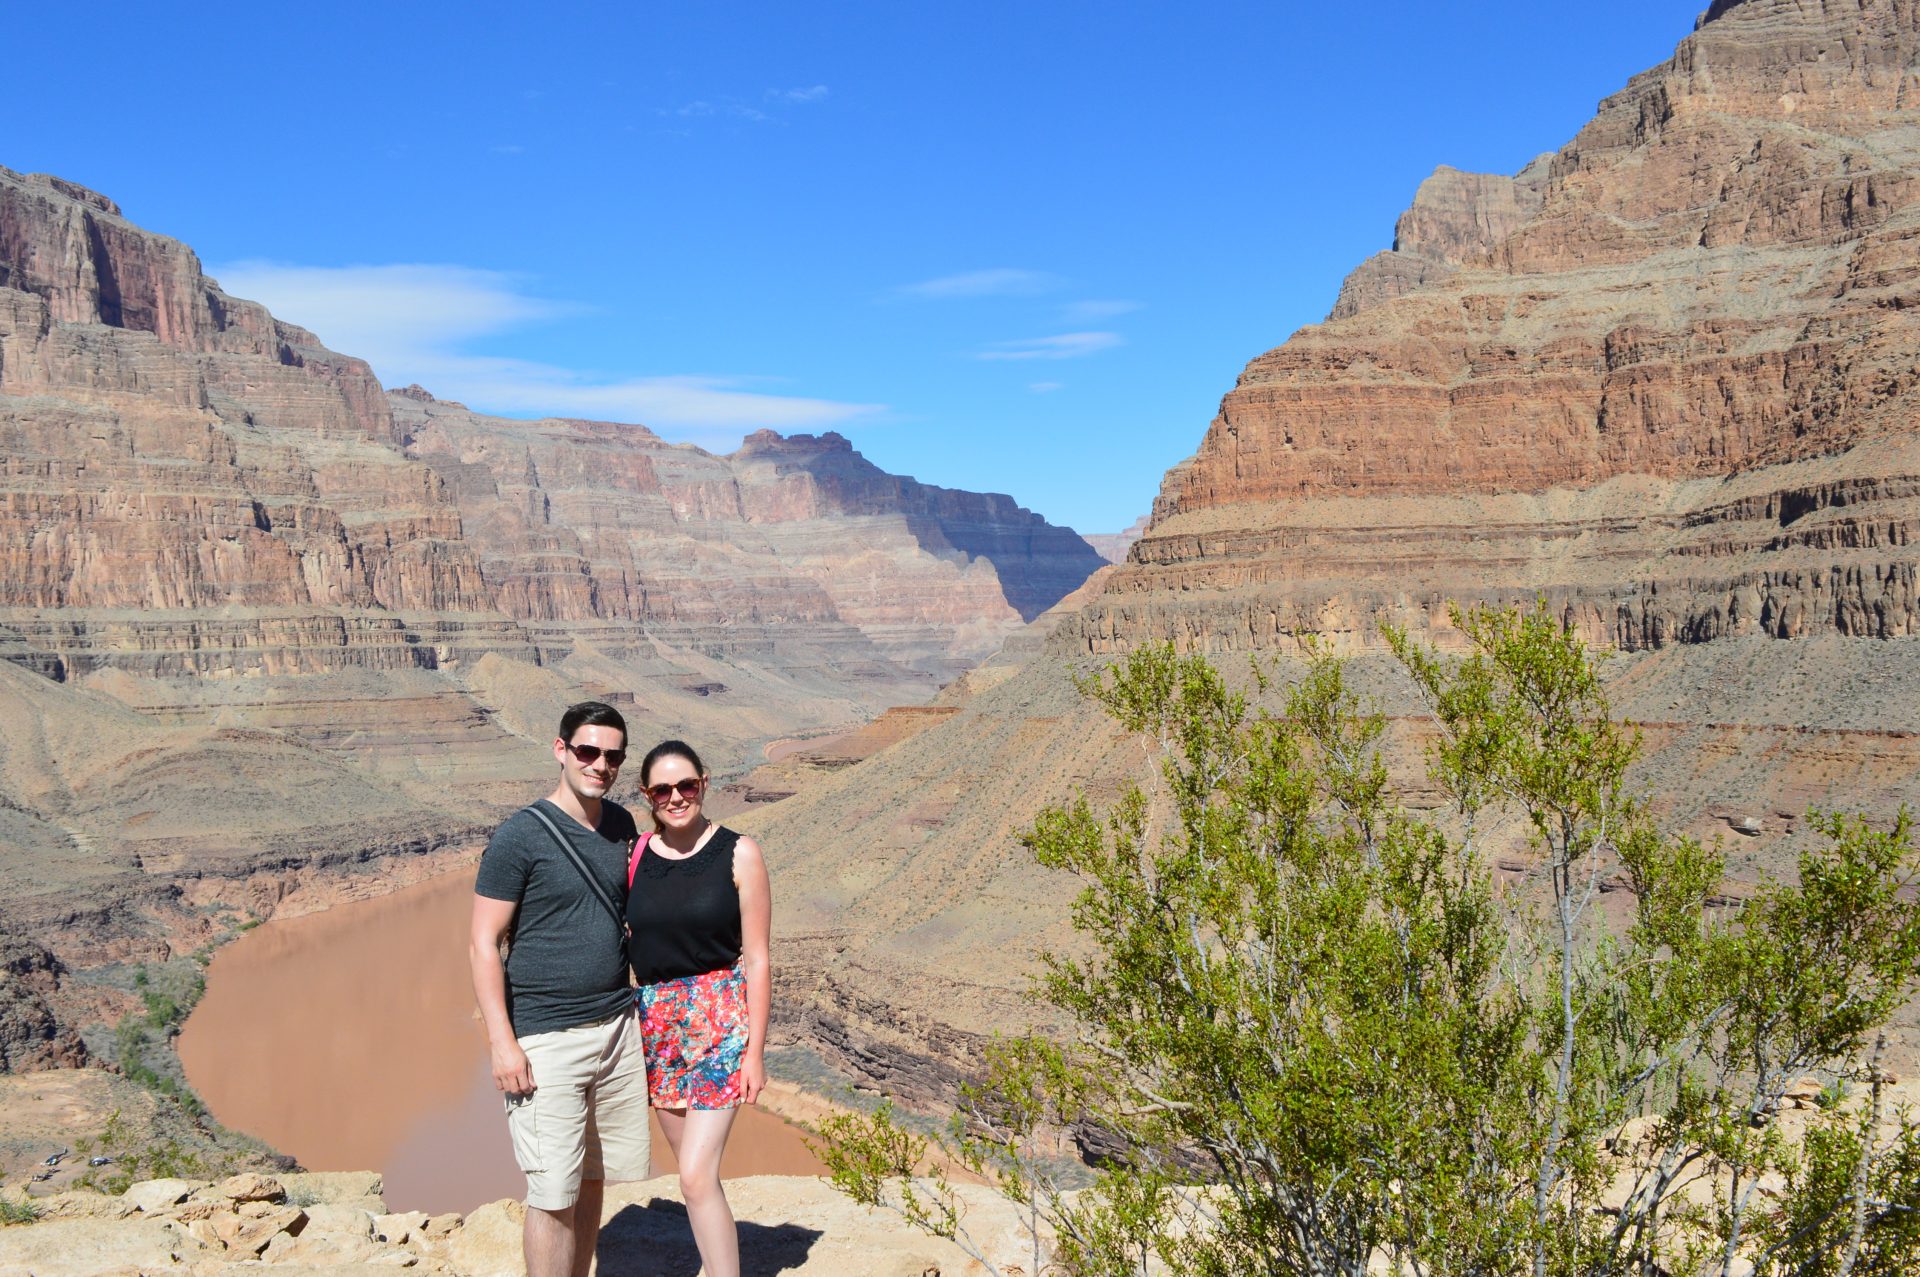 In the Grand Canyon